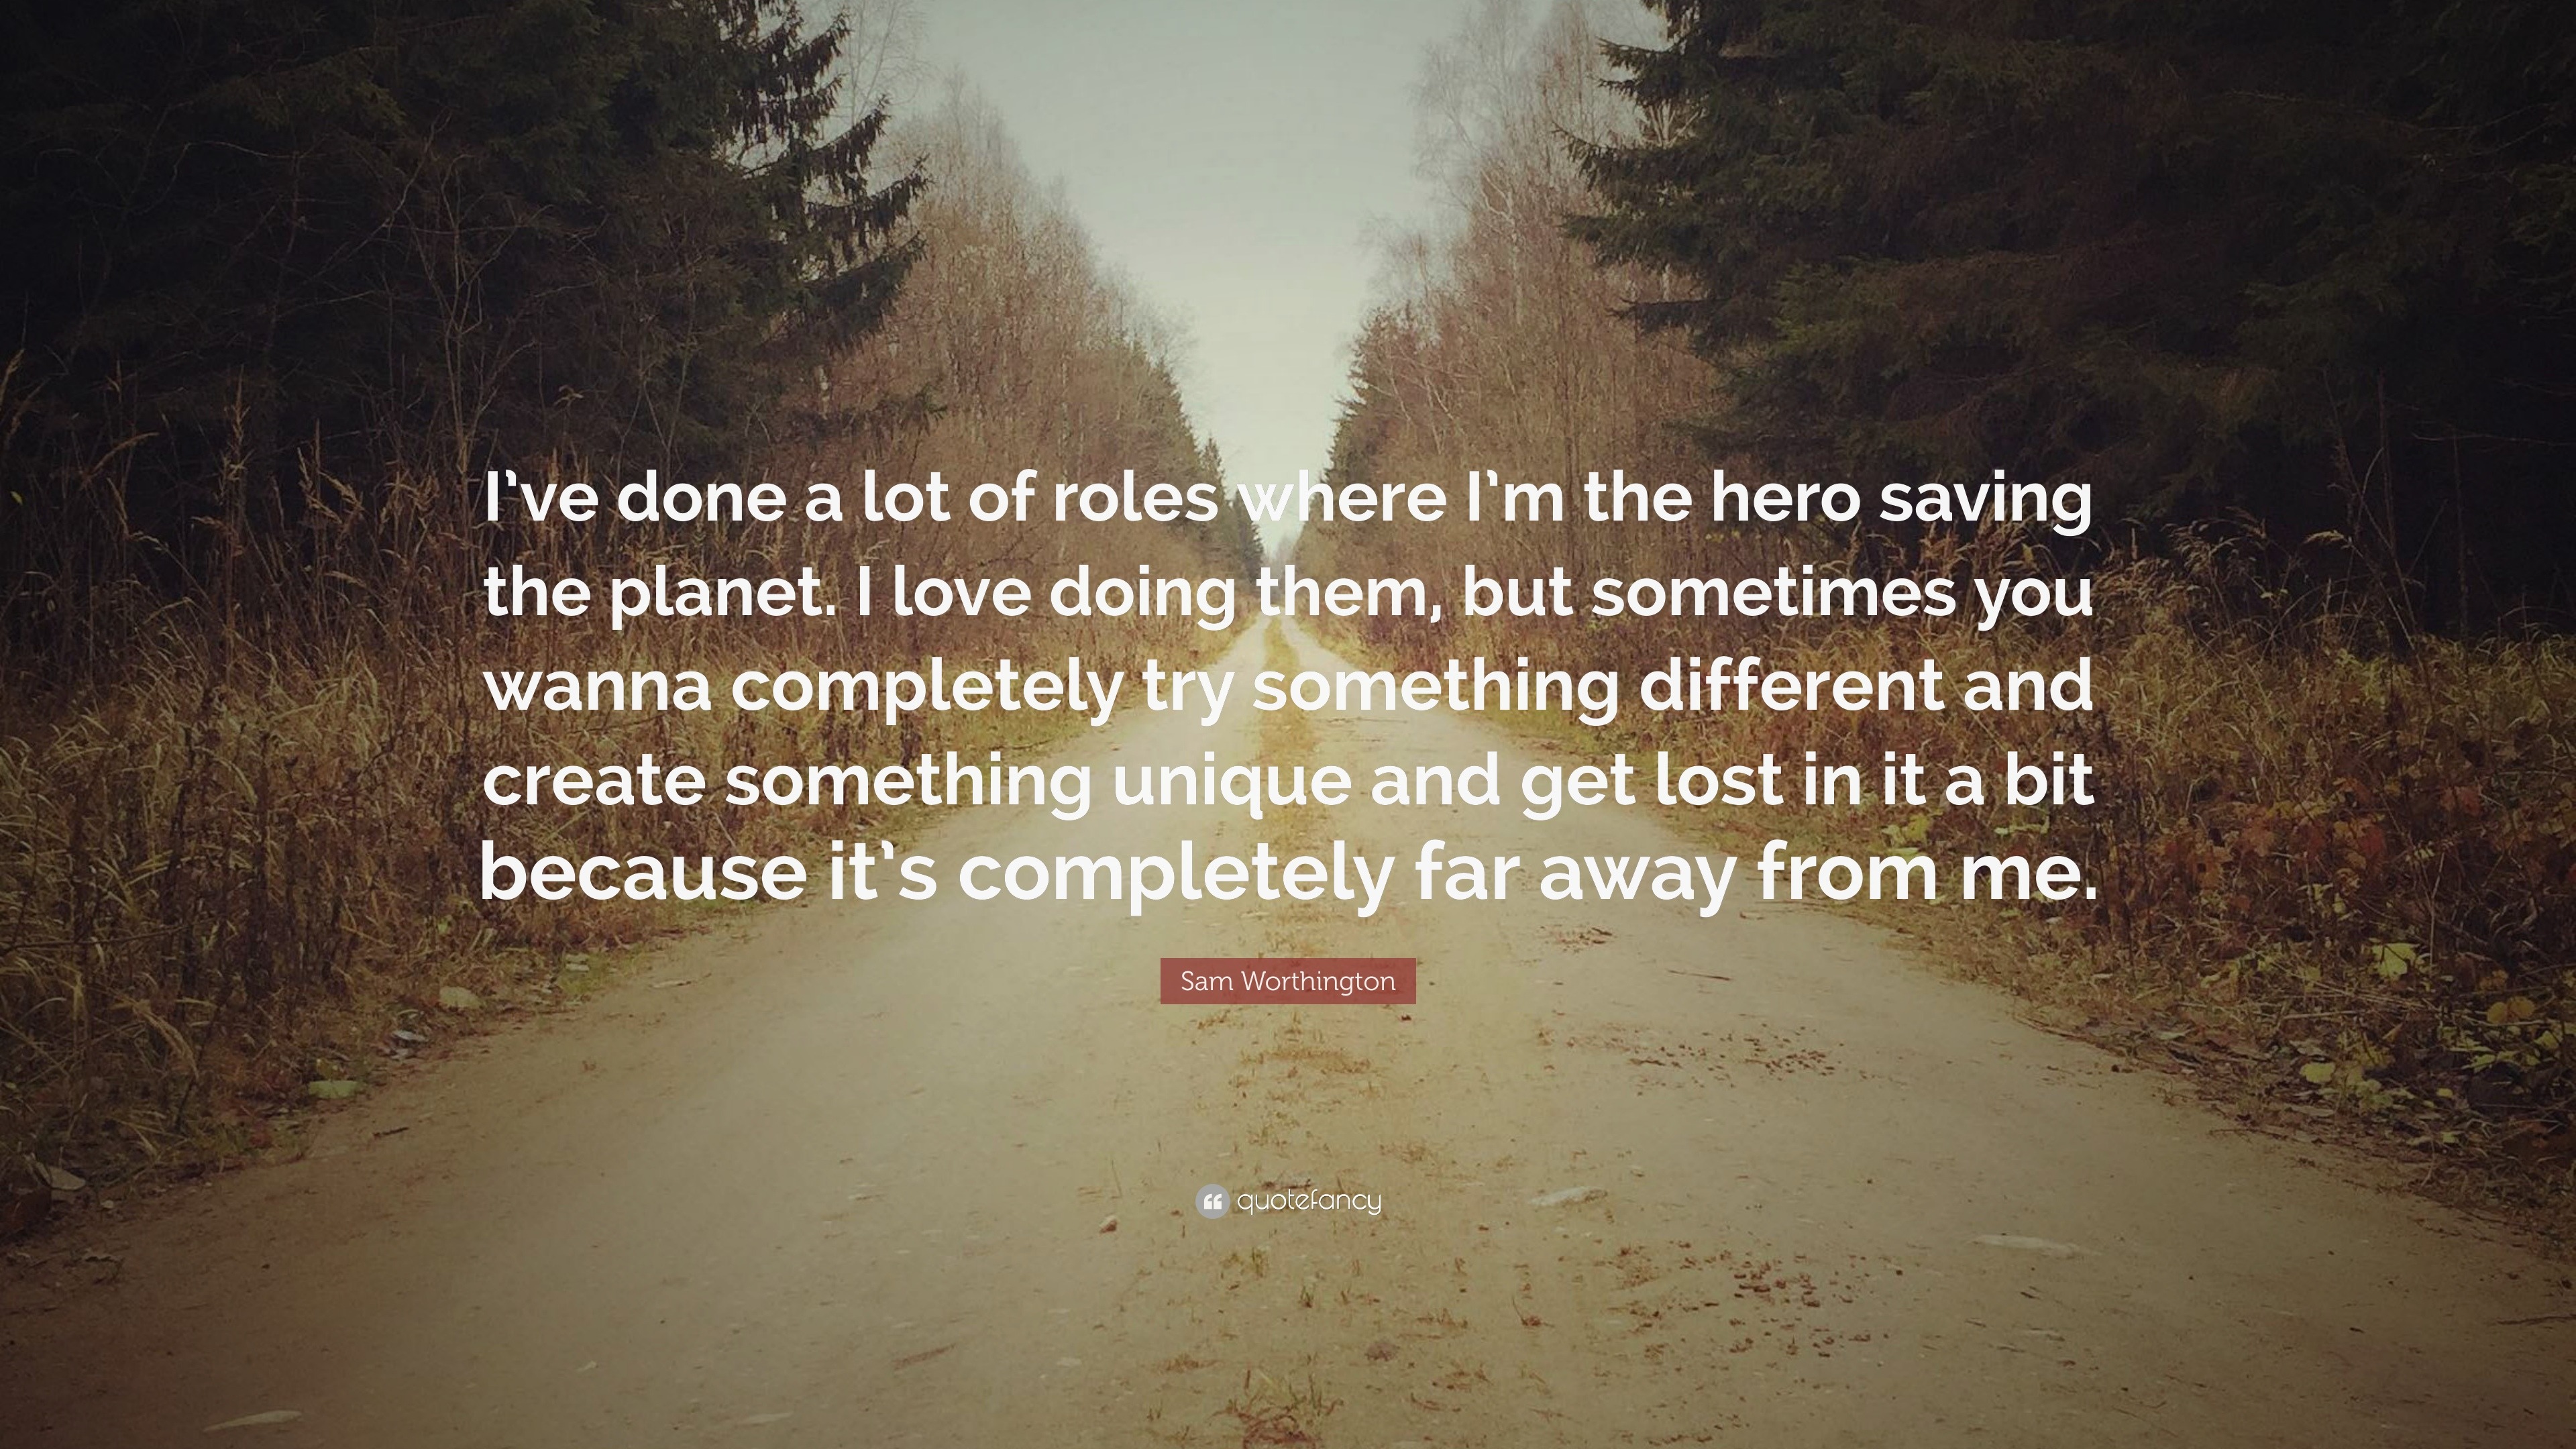 Sam Worthington Quote: “I’ve done a lot of roles where I’m the hero ...